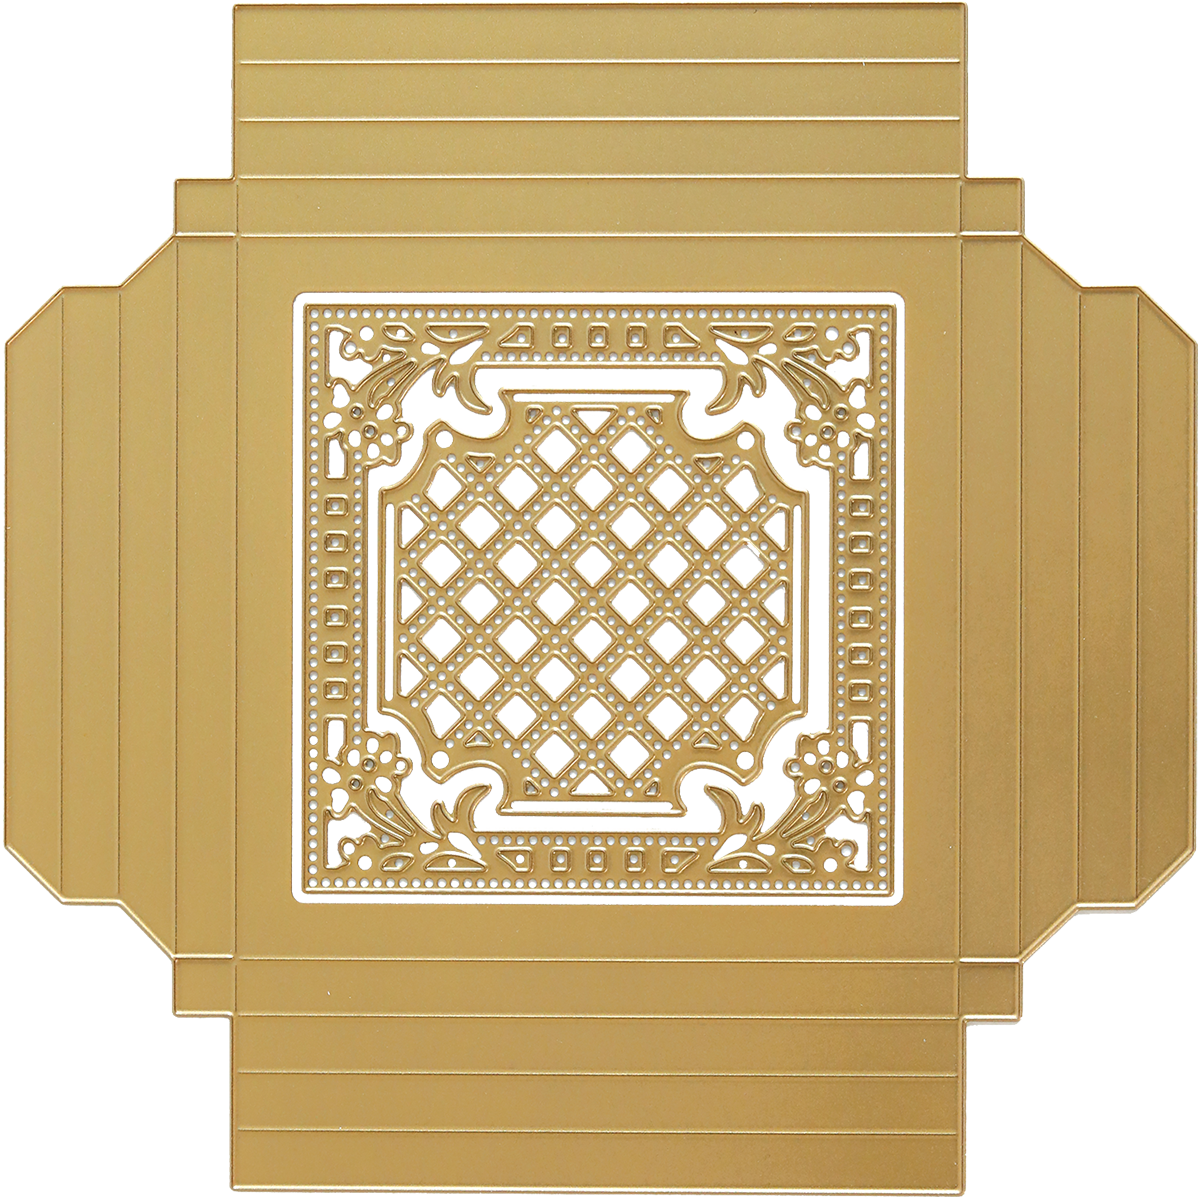 a gold square with a decorative design on it.